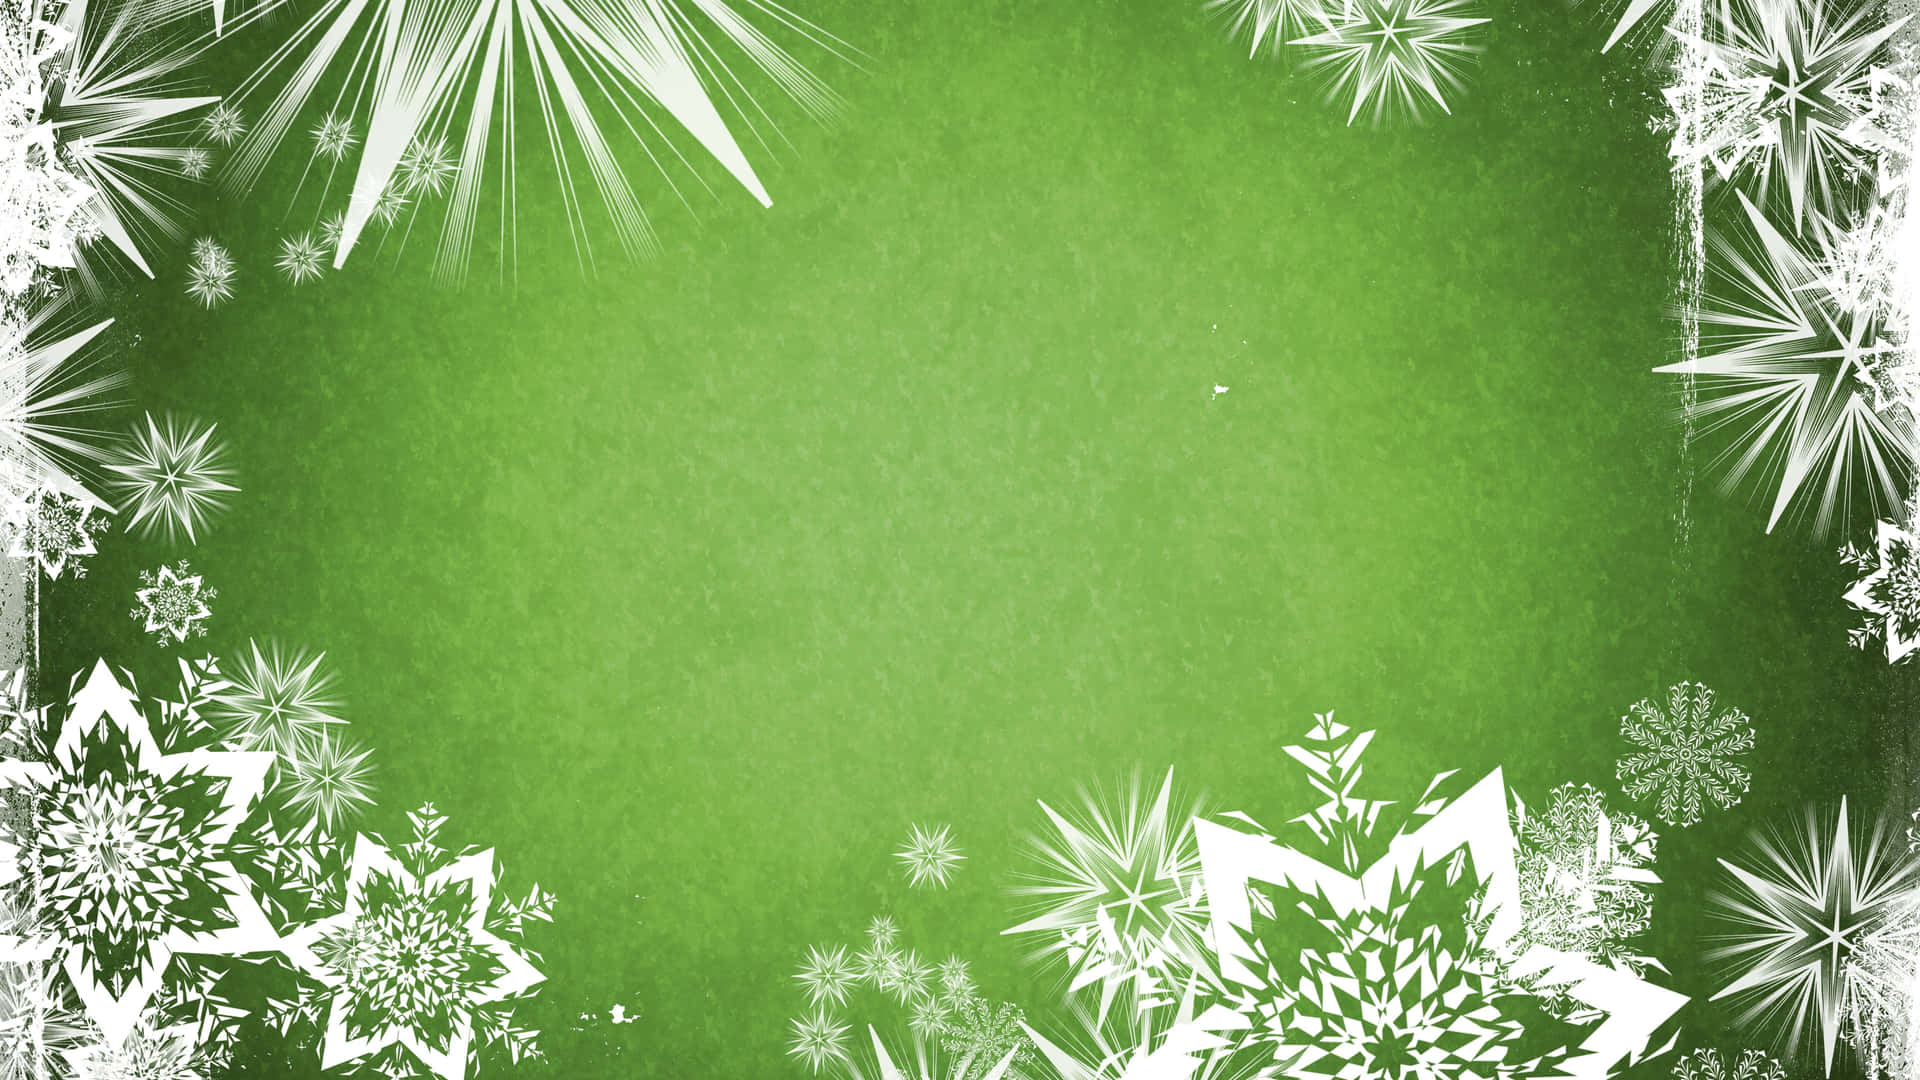 A Green Background With Snowflakes And White Snowflakes